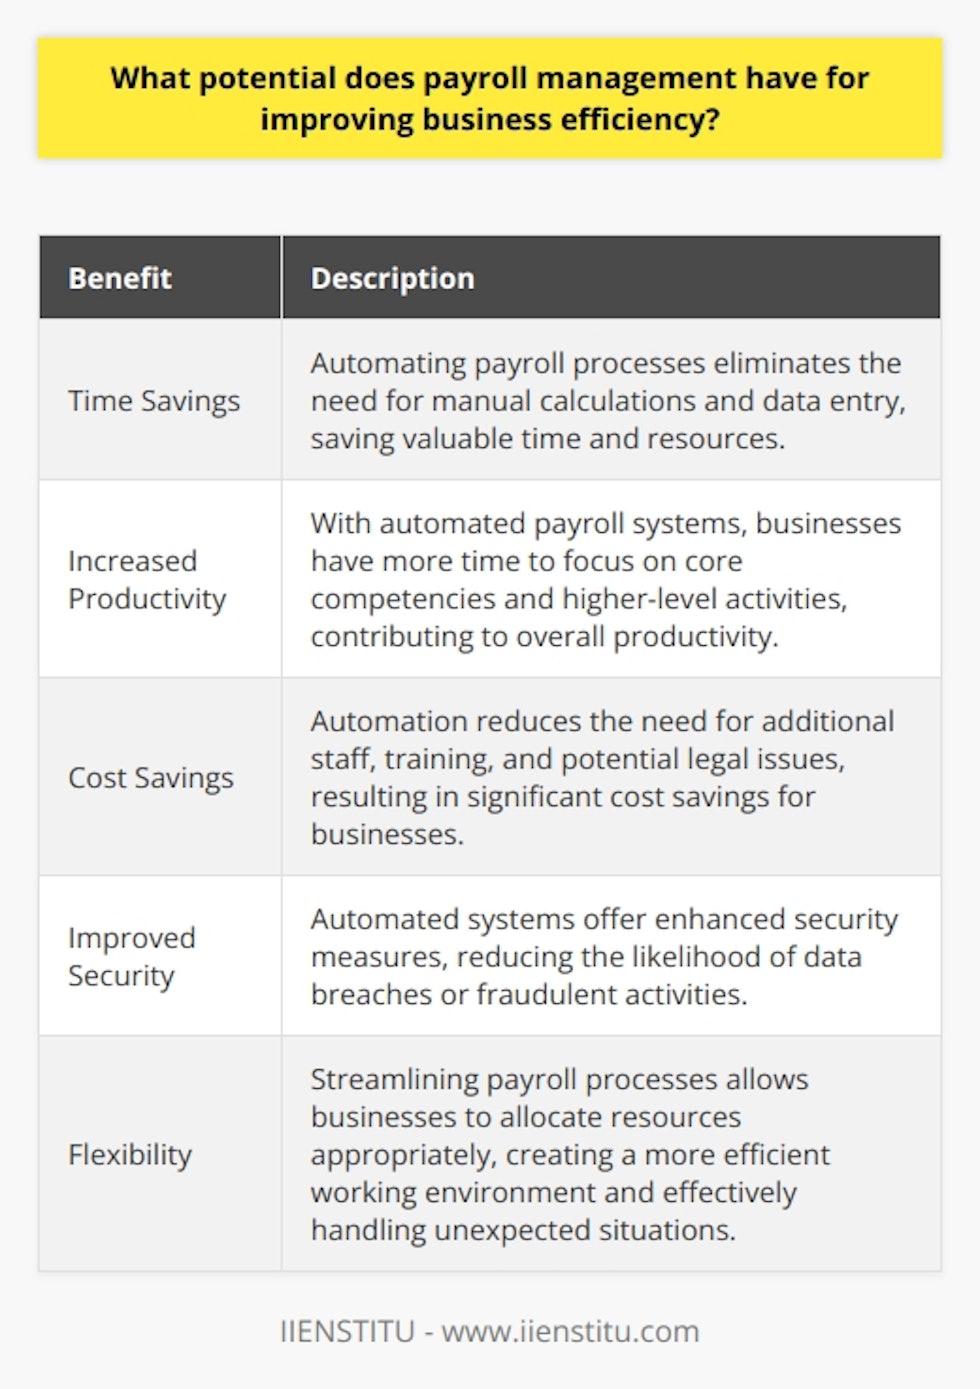 Payroll management has significant potential for improving business efficiency. By streamlining payroll processes, businesses can save time and money, increase productivity, reduce costs, and improve security. One of the most significant benefits of payroll management is the time savings it provides. By automating payroll processes, businesses no longer need to spend time manually calculating wages or updating records. This automation eliminates errors that can occur during manual data entry or calculations, resulting in improved accuracy. Overall, this saves valuable time and resources that can be allocated to other important tasks.In addition to time savings, payroll management can also increase productivity within a business. With automated systems handling payroll processes, businesses have more time available to focus on core competencies and higher-level activities. This can include tasks such as strategy development, customer acquisition, or marketing initiatives, which contribute to the overall success of the organization.Moreover, automating payroll processes can lead to significant cost savings. Businesses no longer need to hire additional staff or provide extensive training for employees to handle payroll-related tasks manually. By reducing manual labor, businesses can save costs associated with wages, training, and potential legal issues resulting from errors in processing payrolls. This cost savings extends beyond financial benefits and also provides peace of mind for employers, as the use of automated systems reduces the likelihood of errors occurring during data entry and calculations.Improved security is another advantage of payroll management. Automated systems offer greater accuracy and security measures compared to traditional manual methods. These systems provide multiple layers of security protocols, making it challenging for hackers or malicious actors to compromise employee data such as bank accounts or Social Security numbers. Additionally, automated systems can be programmed to only allow authorized personnel access to sensitive information, adding an extra layer of security against any fraudulent activity.Overall, utilizing automated systems for payroll management has potential benefits in various areas, including increased productivity, cost savings, improved security, and time savings. By streamlining payroll processes, businesses can create a more efficient working environment and allocate resources appropriately. This flexibility allows organizations to effectively handle unexpected situations while optimizing performance in the long run, ultimately contributing to the overall success and efficiency of the business.